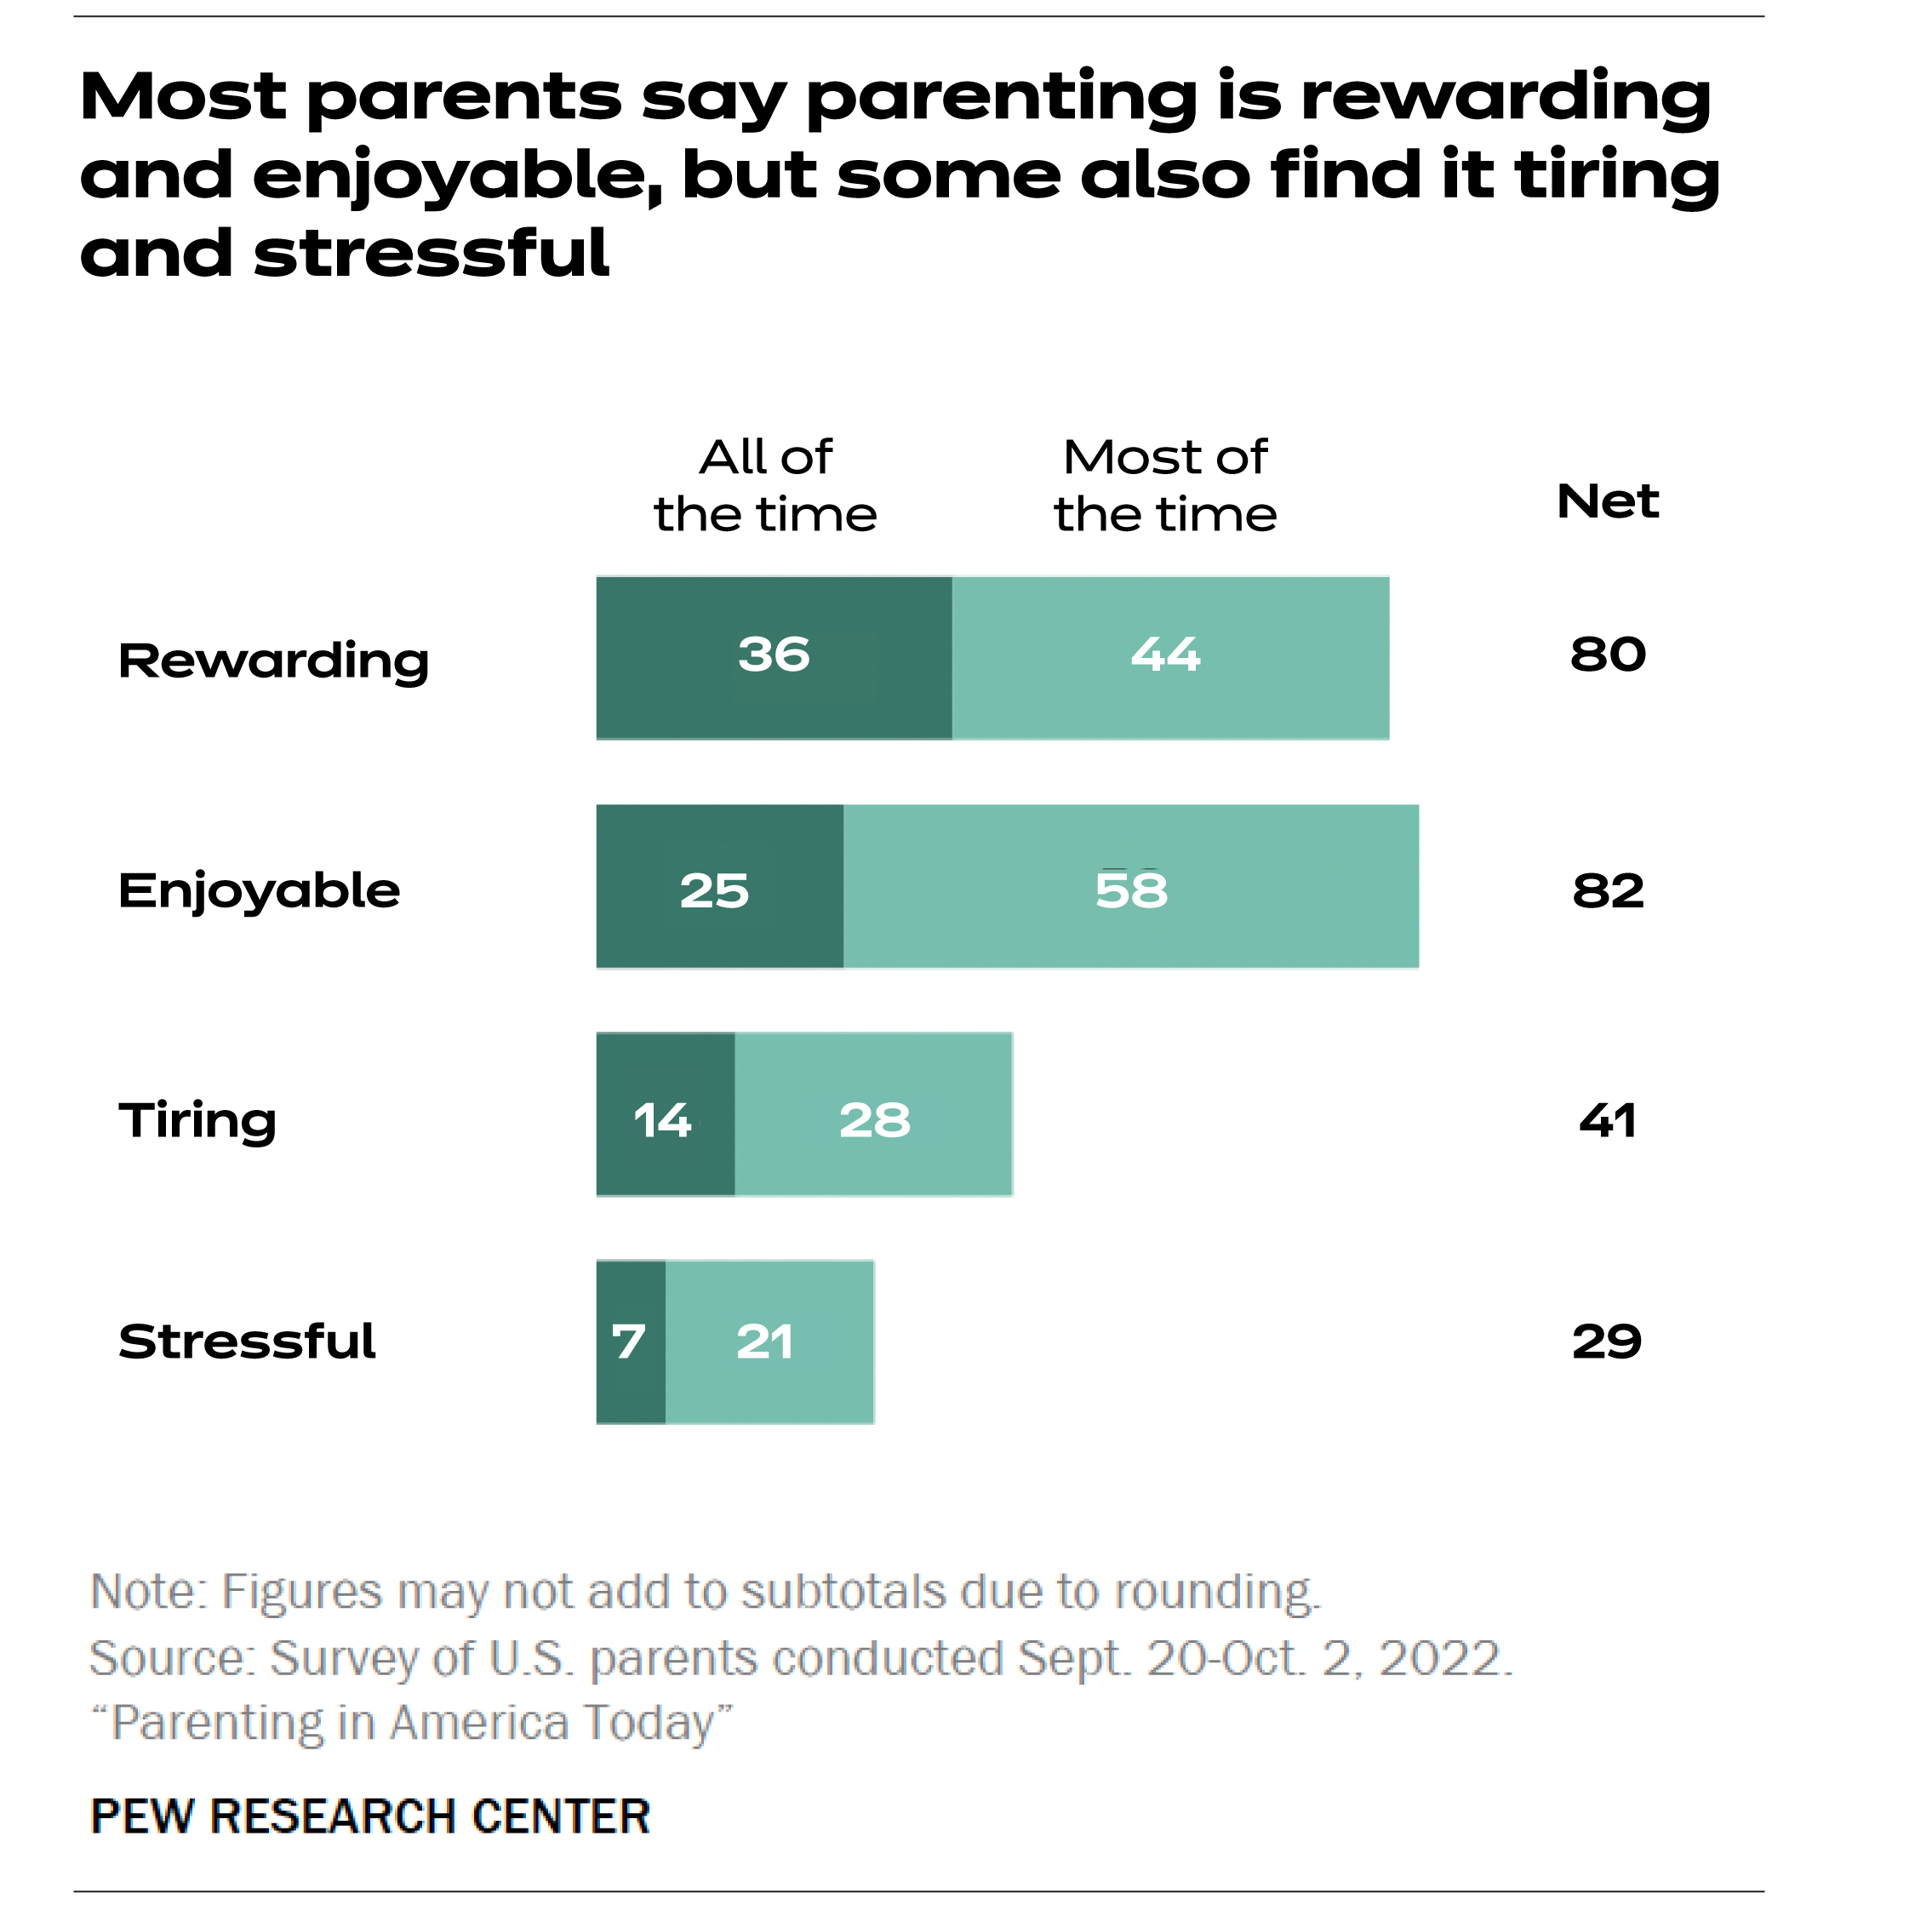 Bar chart of Pew poll shows 80% parents find parenting rewarding; 82% find it enjoyable; 41% tiring; and 29% stressful.